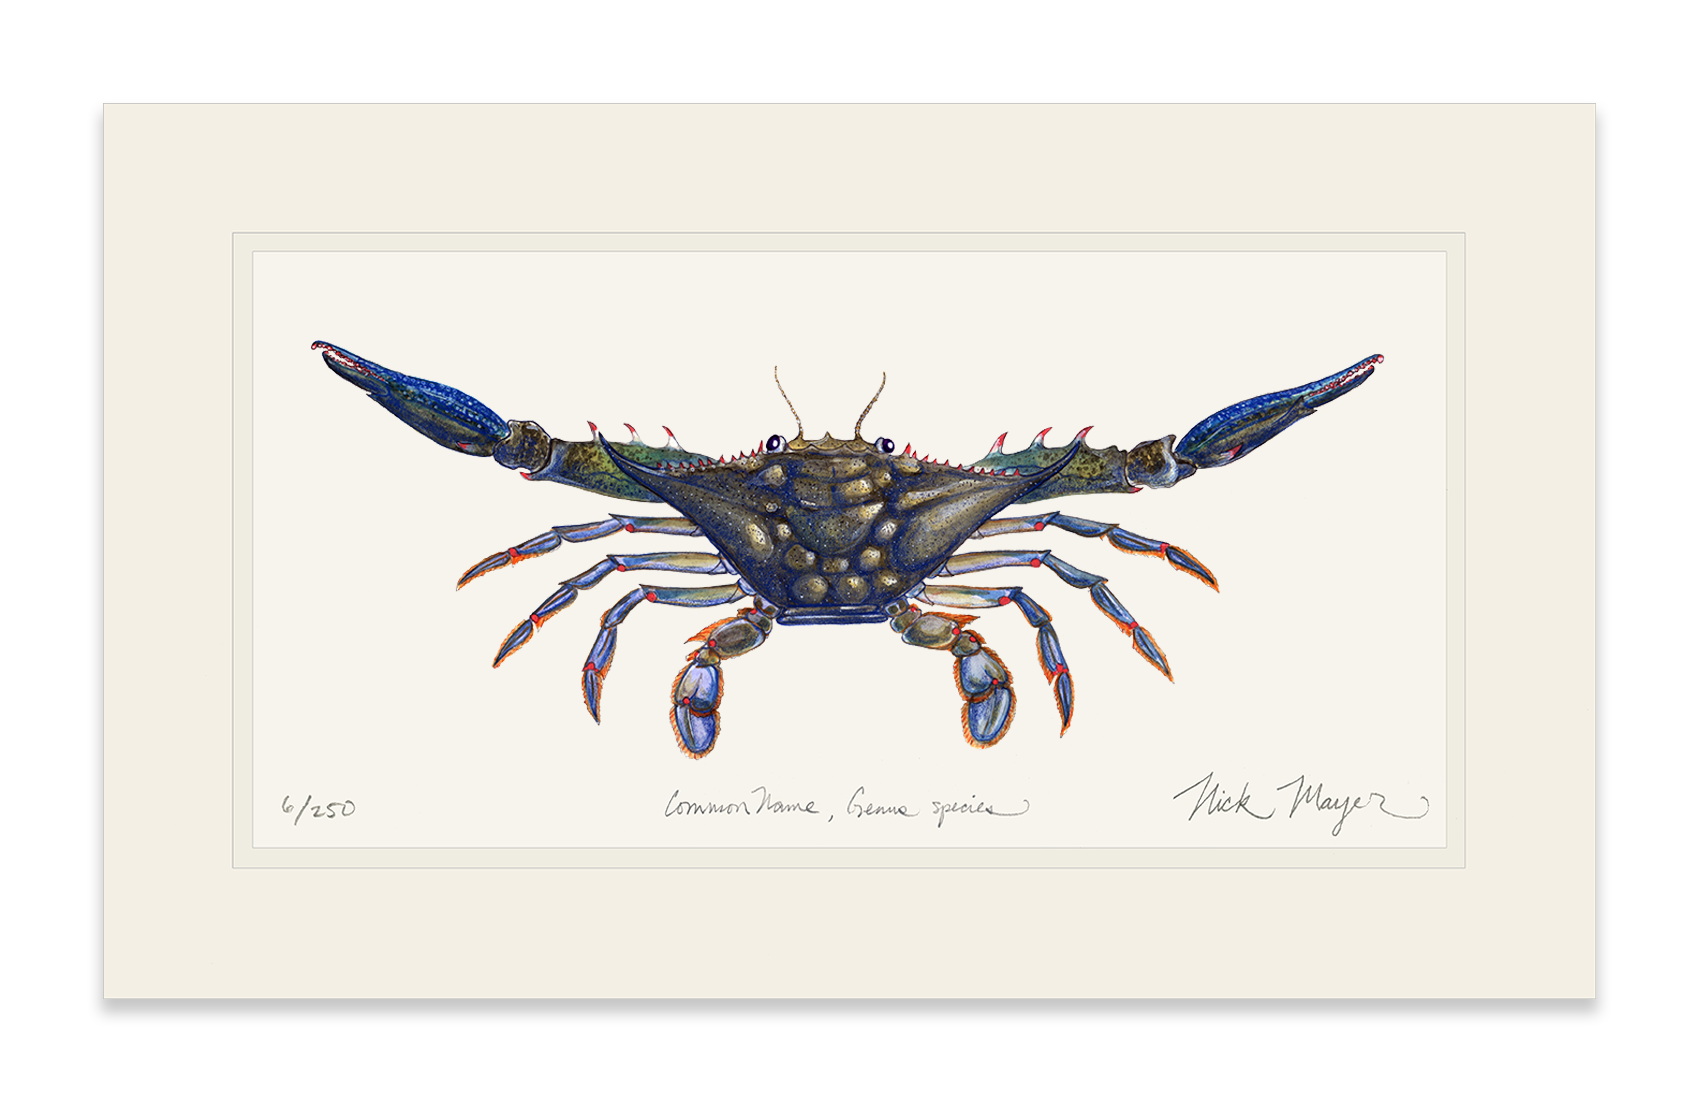 Blue Crab Claws Out Print